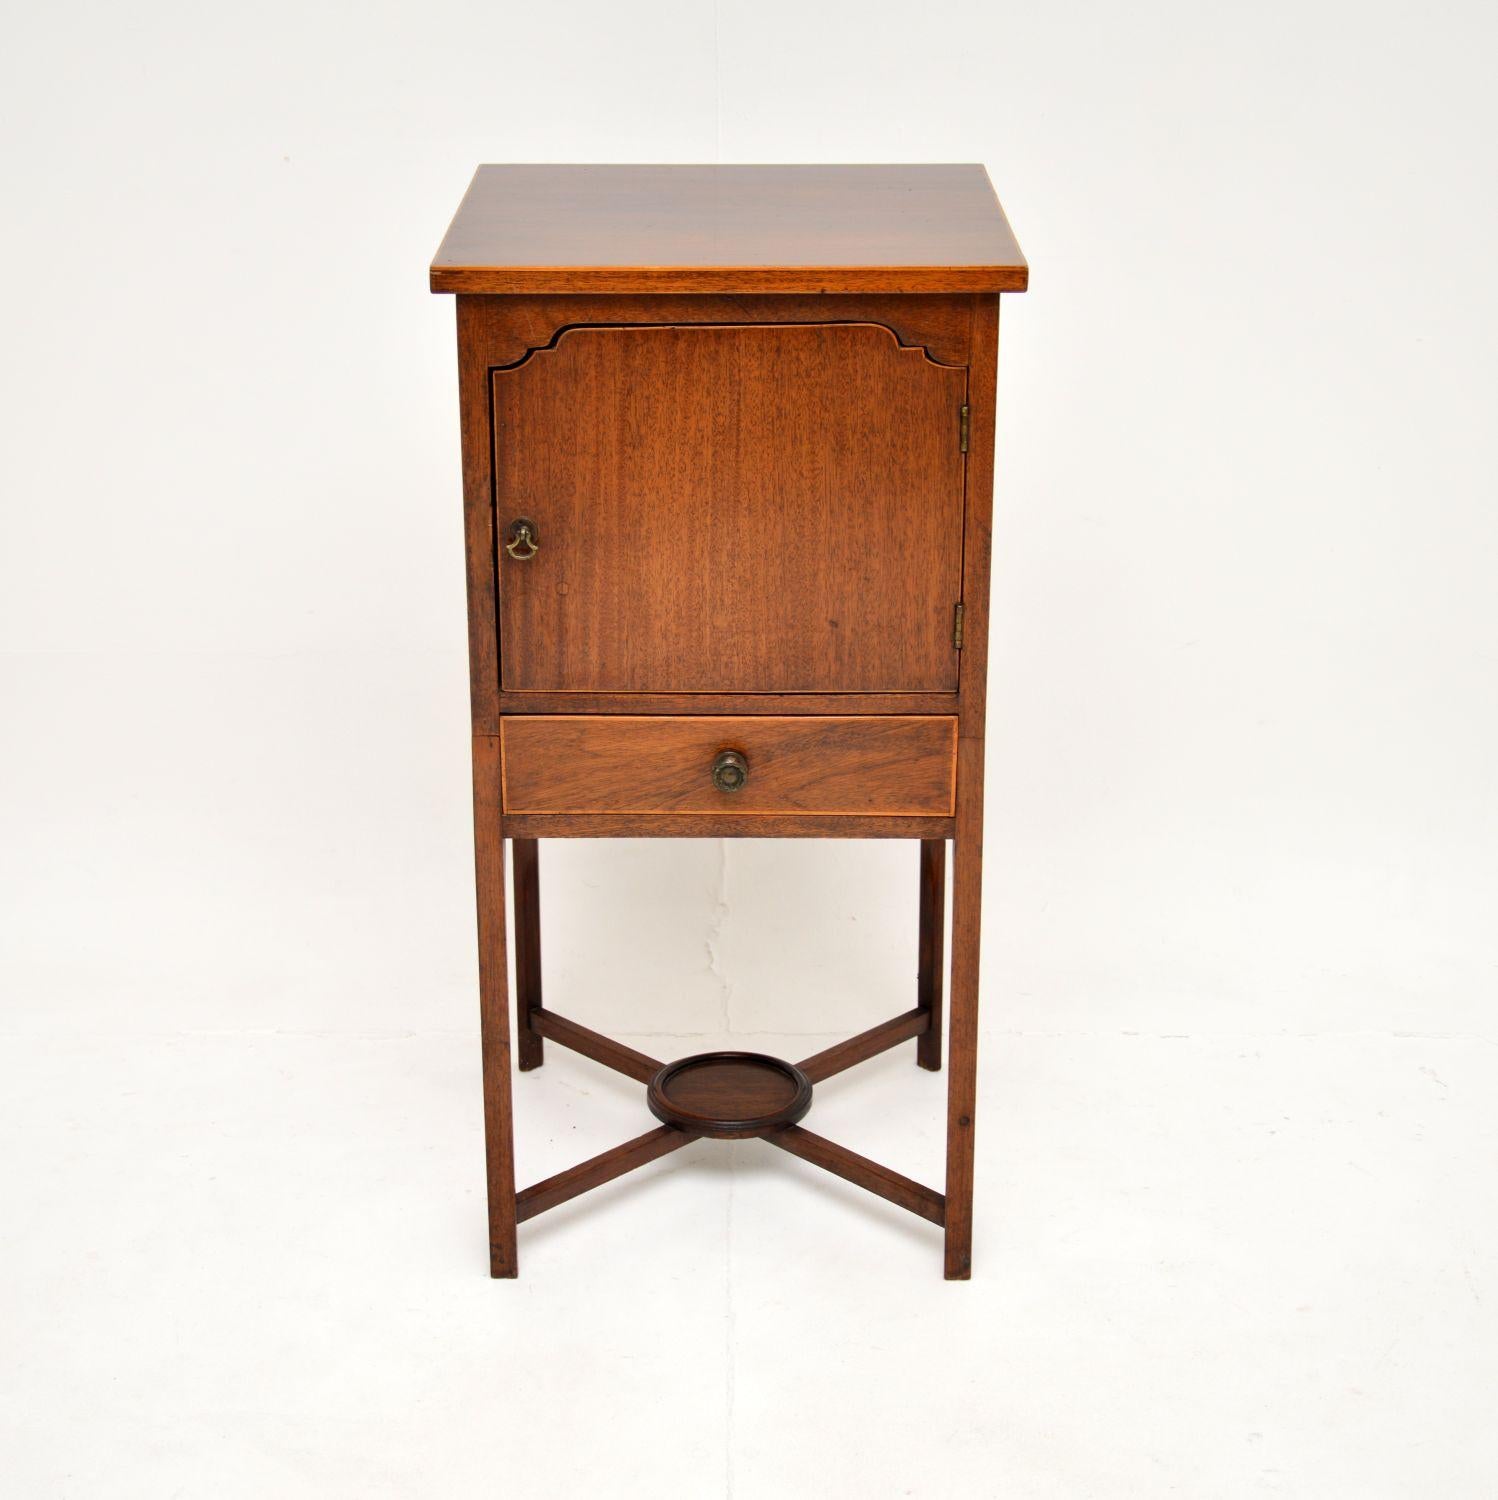 A lovely antique Georgian side cabinet on legs, made in England and dating from the 1810-20’s period.

This is of great quality and is a very useful size, perfect for use as a bedside cabinet or in various other settings around the home. The back is